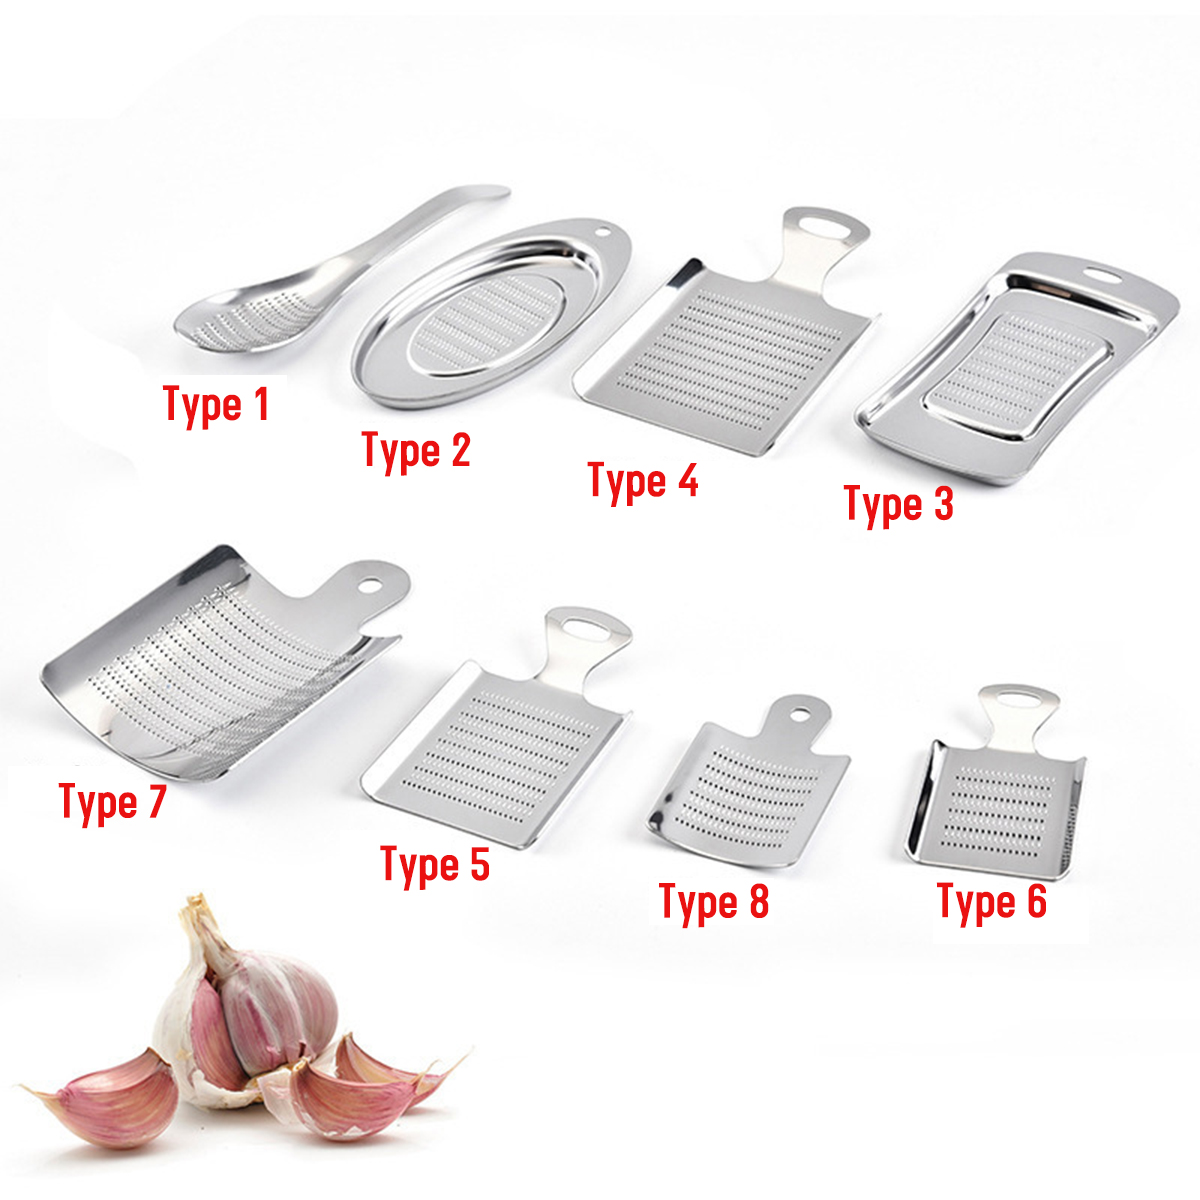 Manual-Stainless-Steel-Garlic-Press-Tool-Outdoor-Camping-Traveling-BBQ-Cooking-Tableware-1588437-2